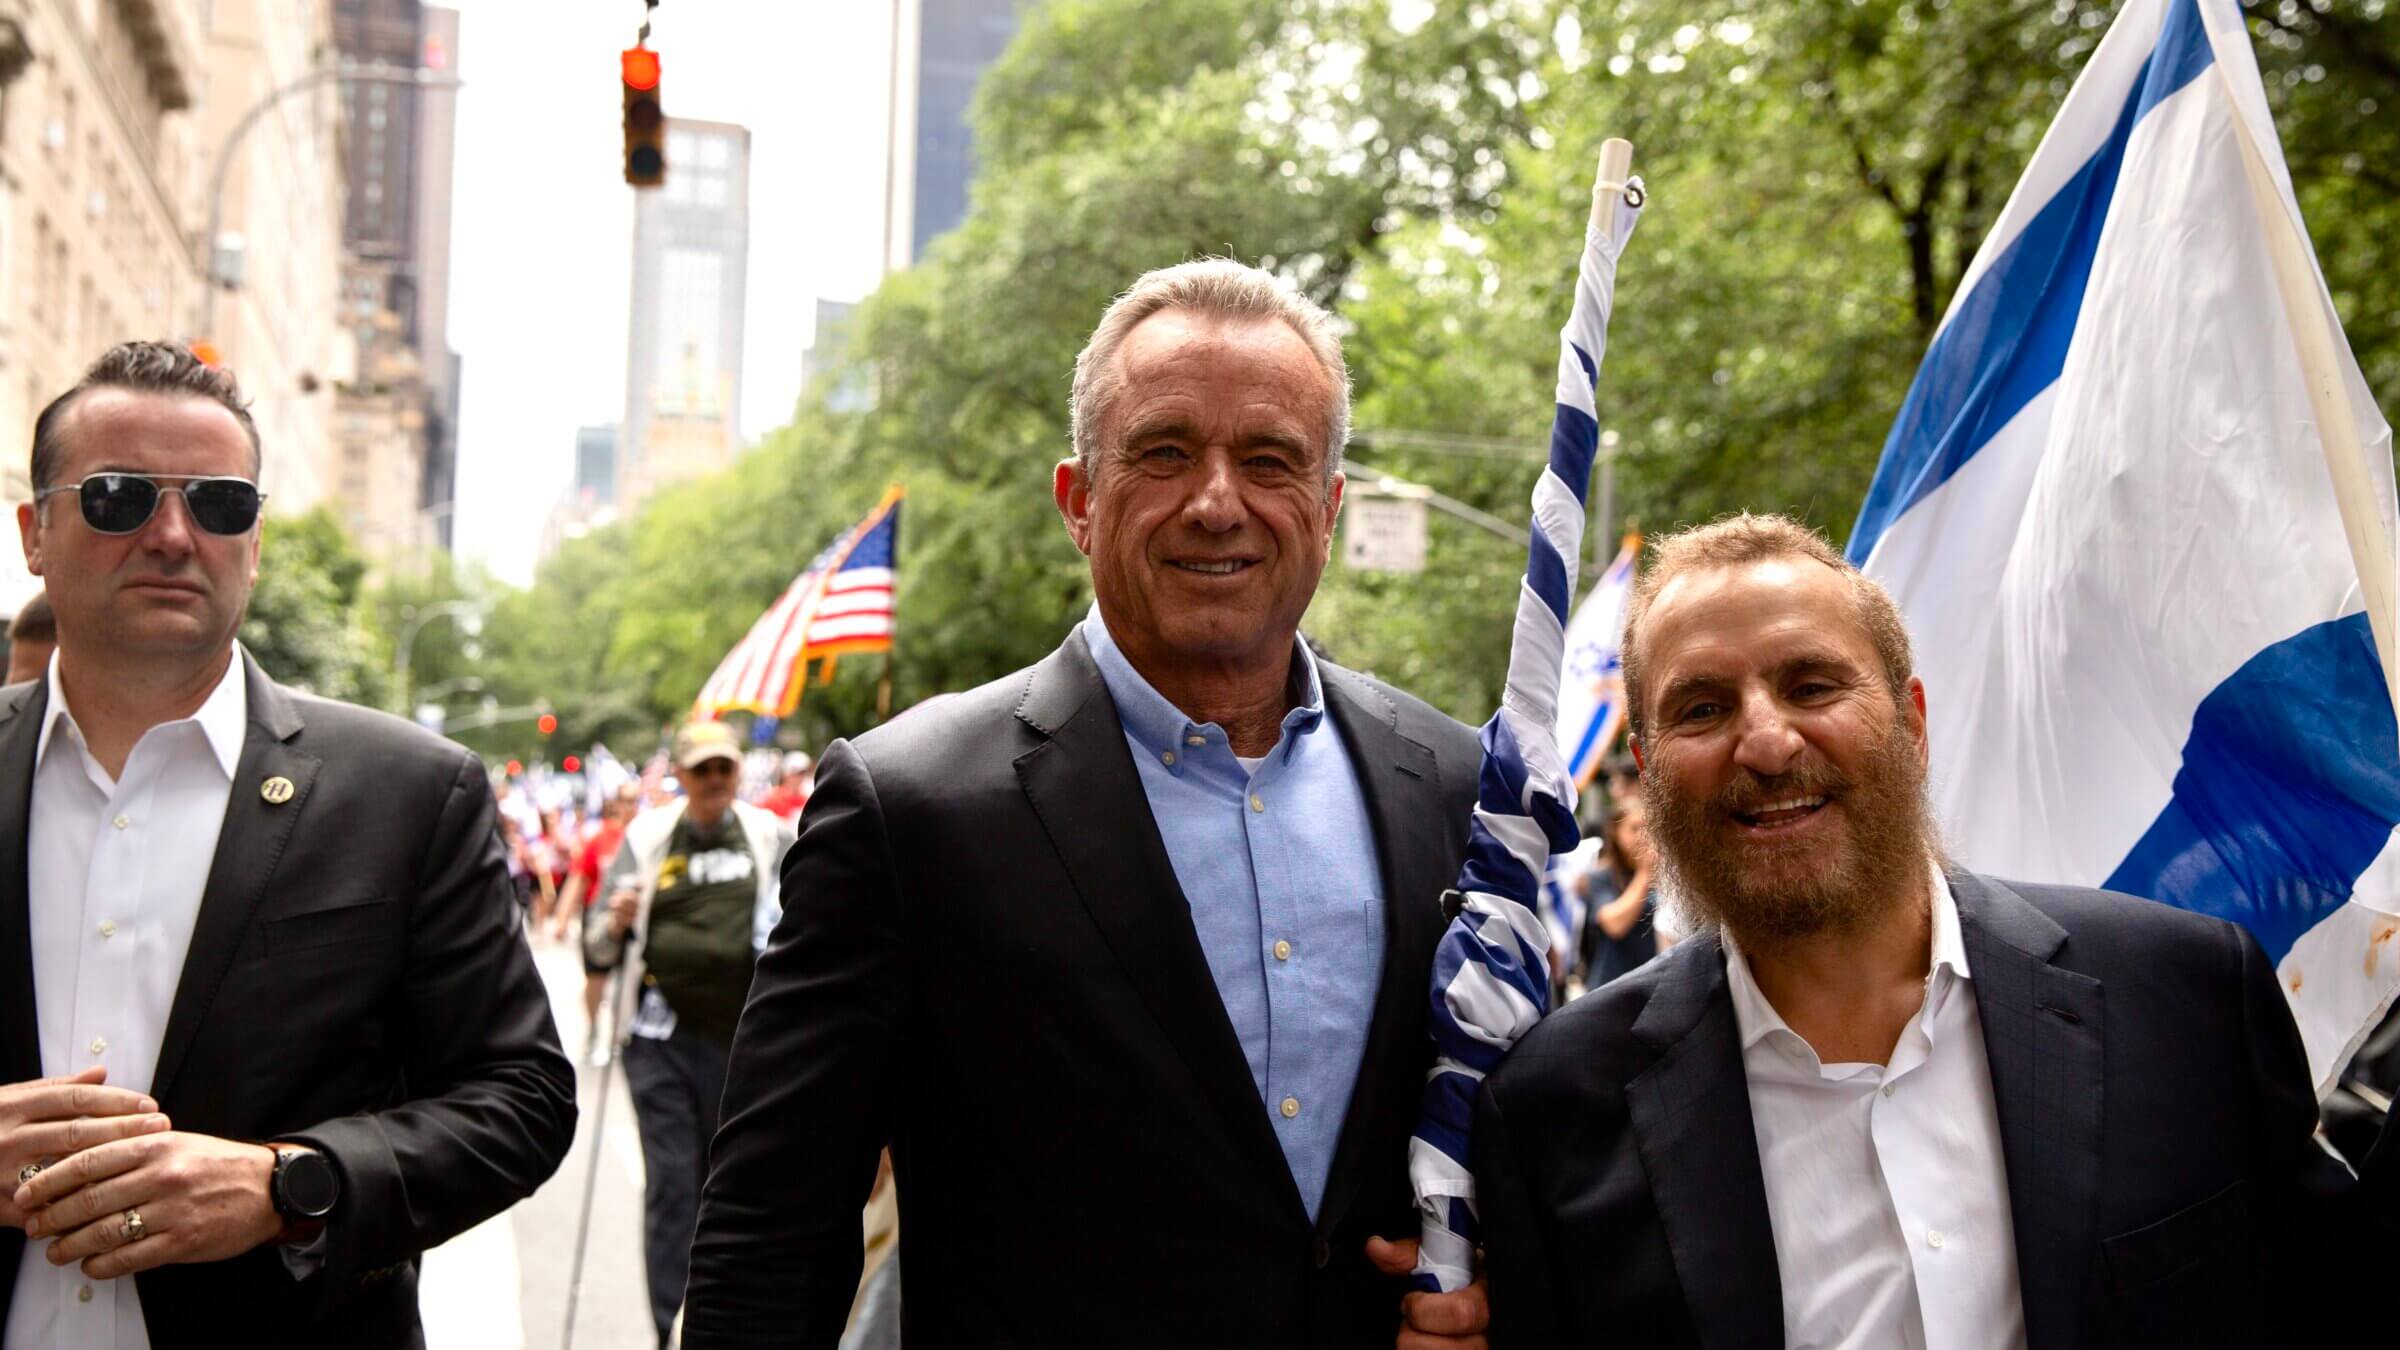 Robert F. Kennedy Jr., a Democratic presidential candidate, at the Celebrate Israel parade on June 4, 2023.